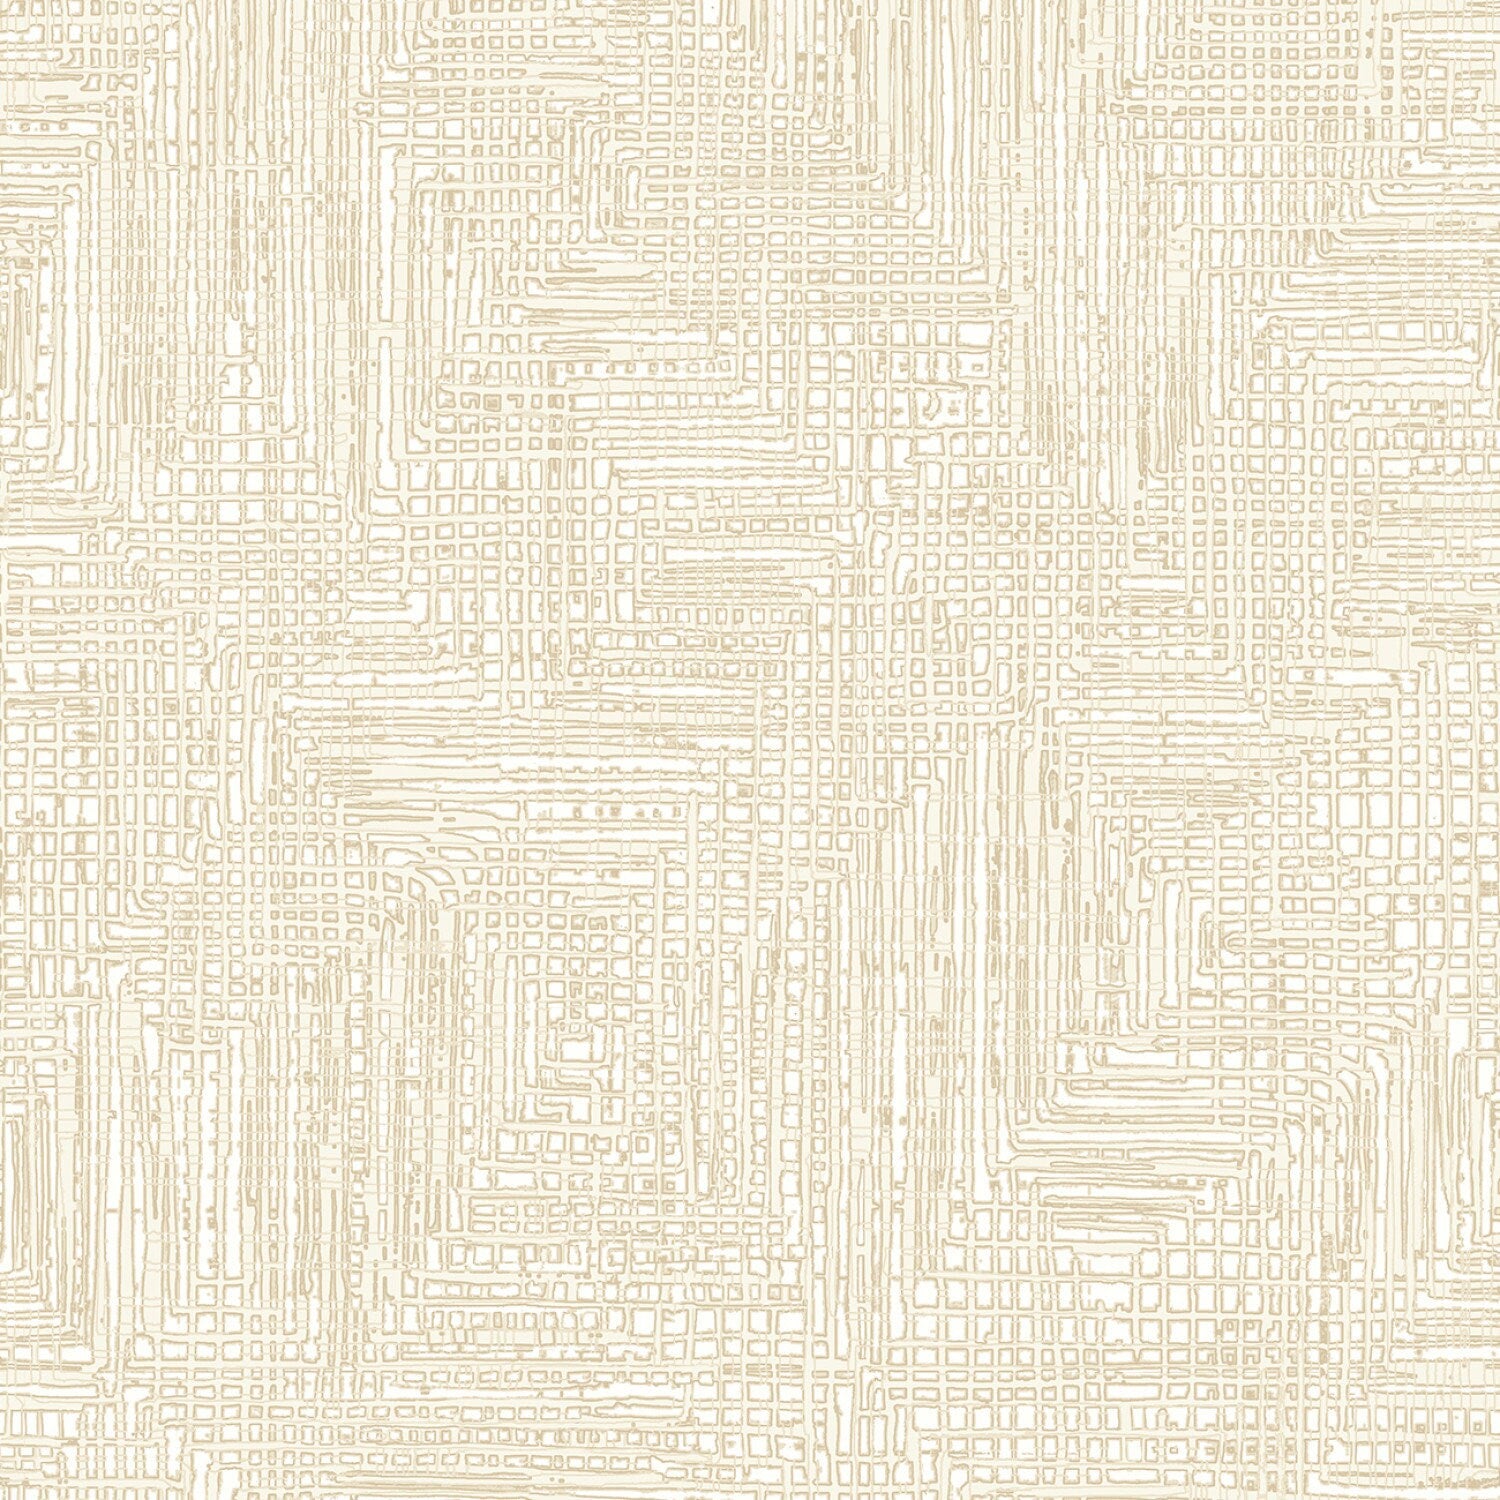 108" Grass Roots - Ecru Grasscloth Wide Quilt Back Fabric, P&B Textiles GROO04973-E, Cream Tonal Texture Wide Quilt Backing, By the Yard